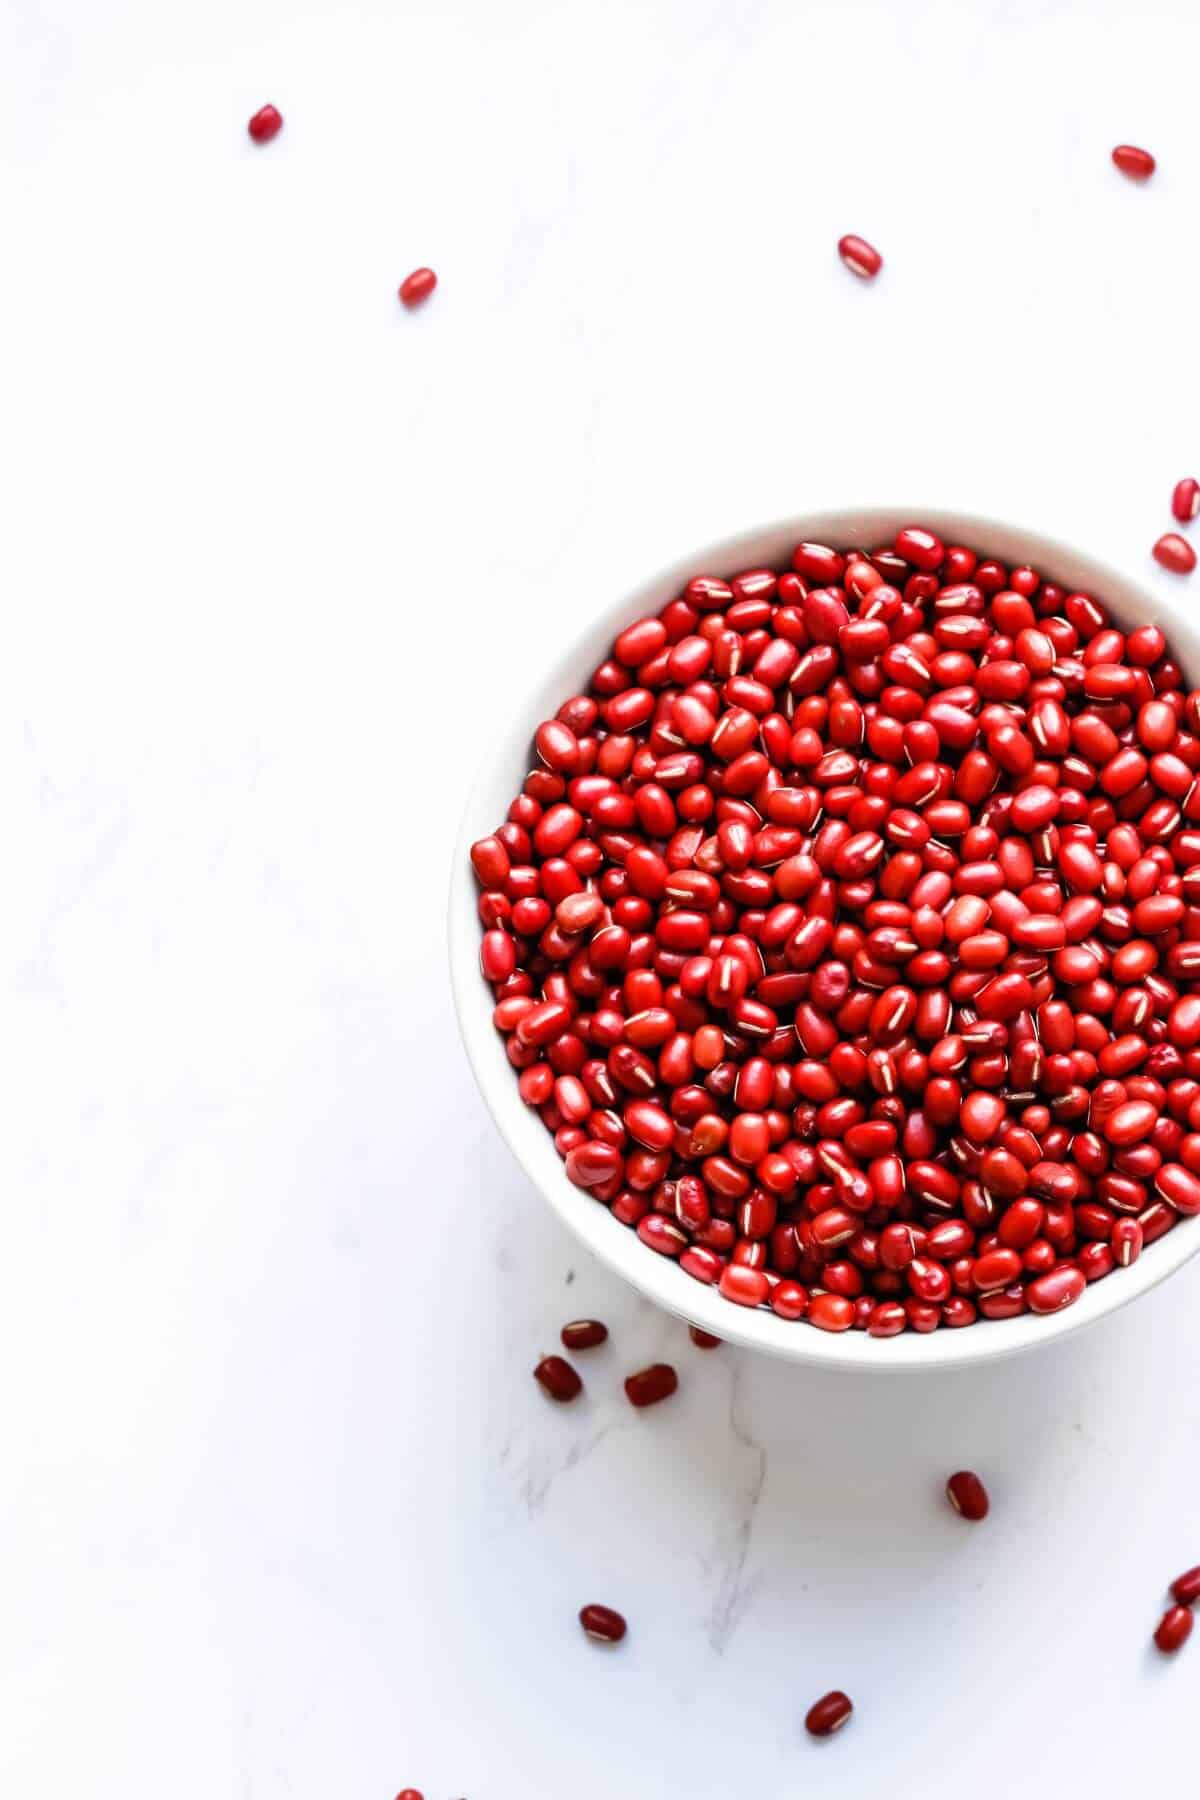 A white bowl filled with dried adzuki beans, some are scattered nearby.